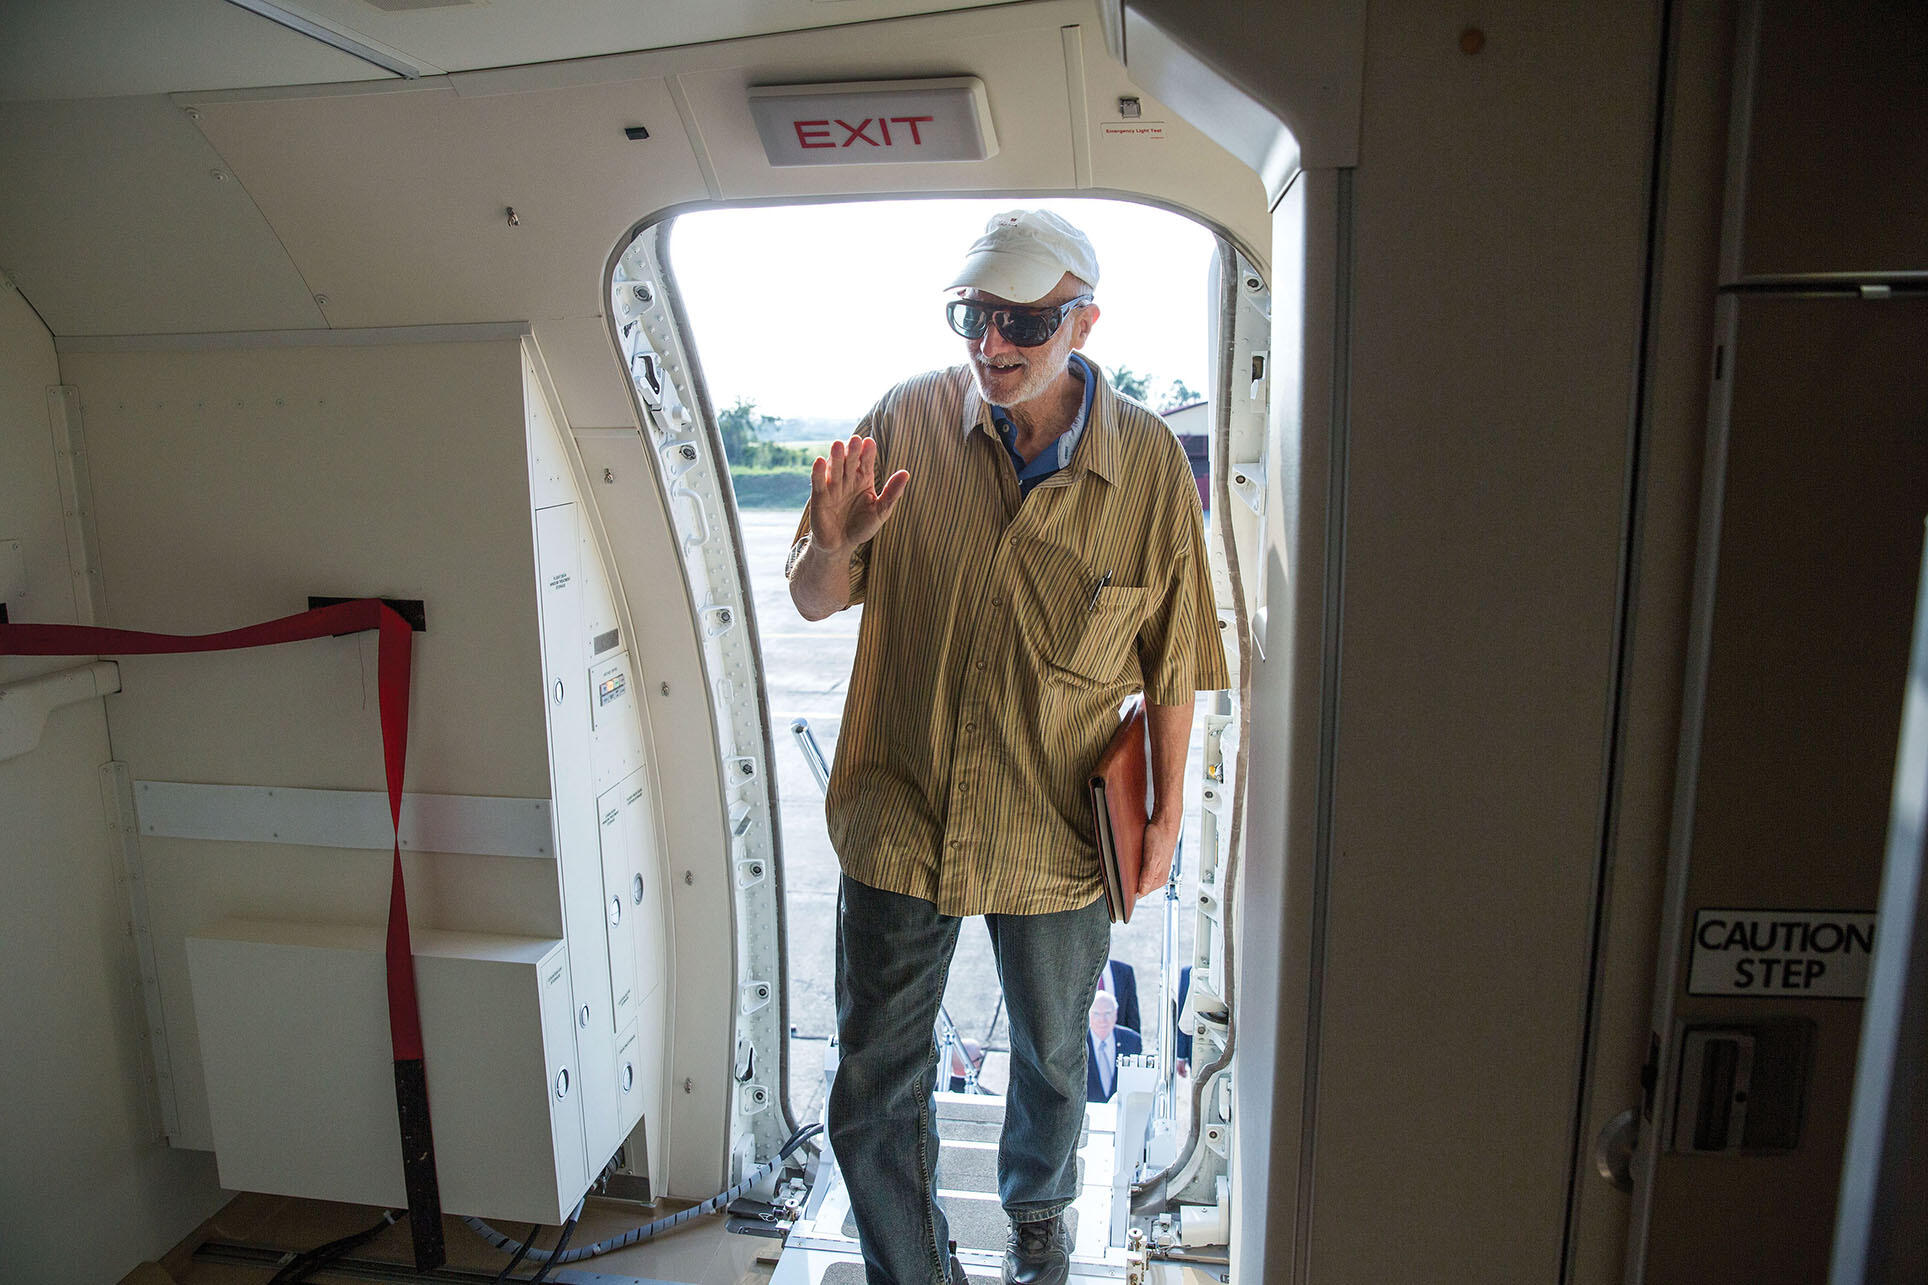 Alan Gross silhouetted in the door while boarding a U.S. government plane during his December 17, 2014, release at an airport near Havana, Cuba. (Photo by Lawrence Jackson/The White House via Getty Images.)